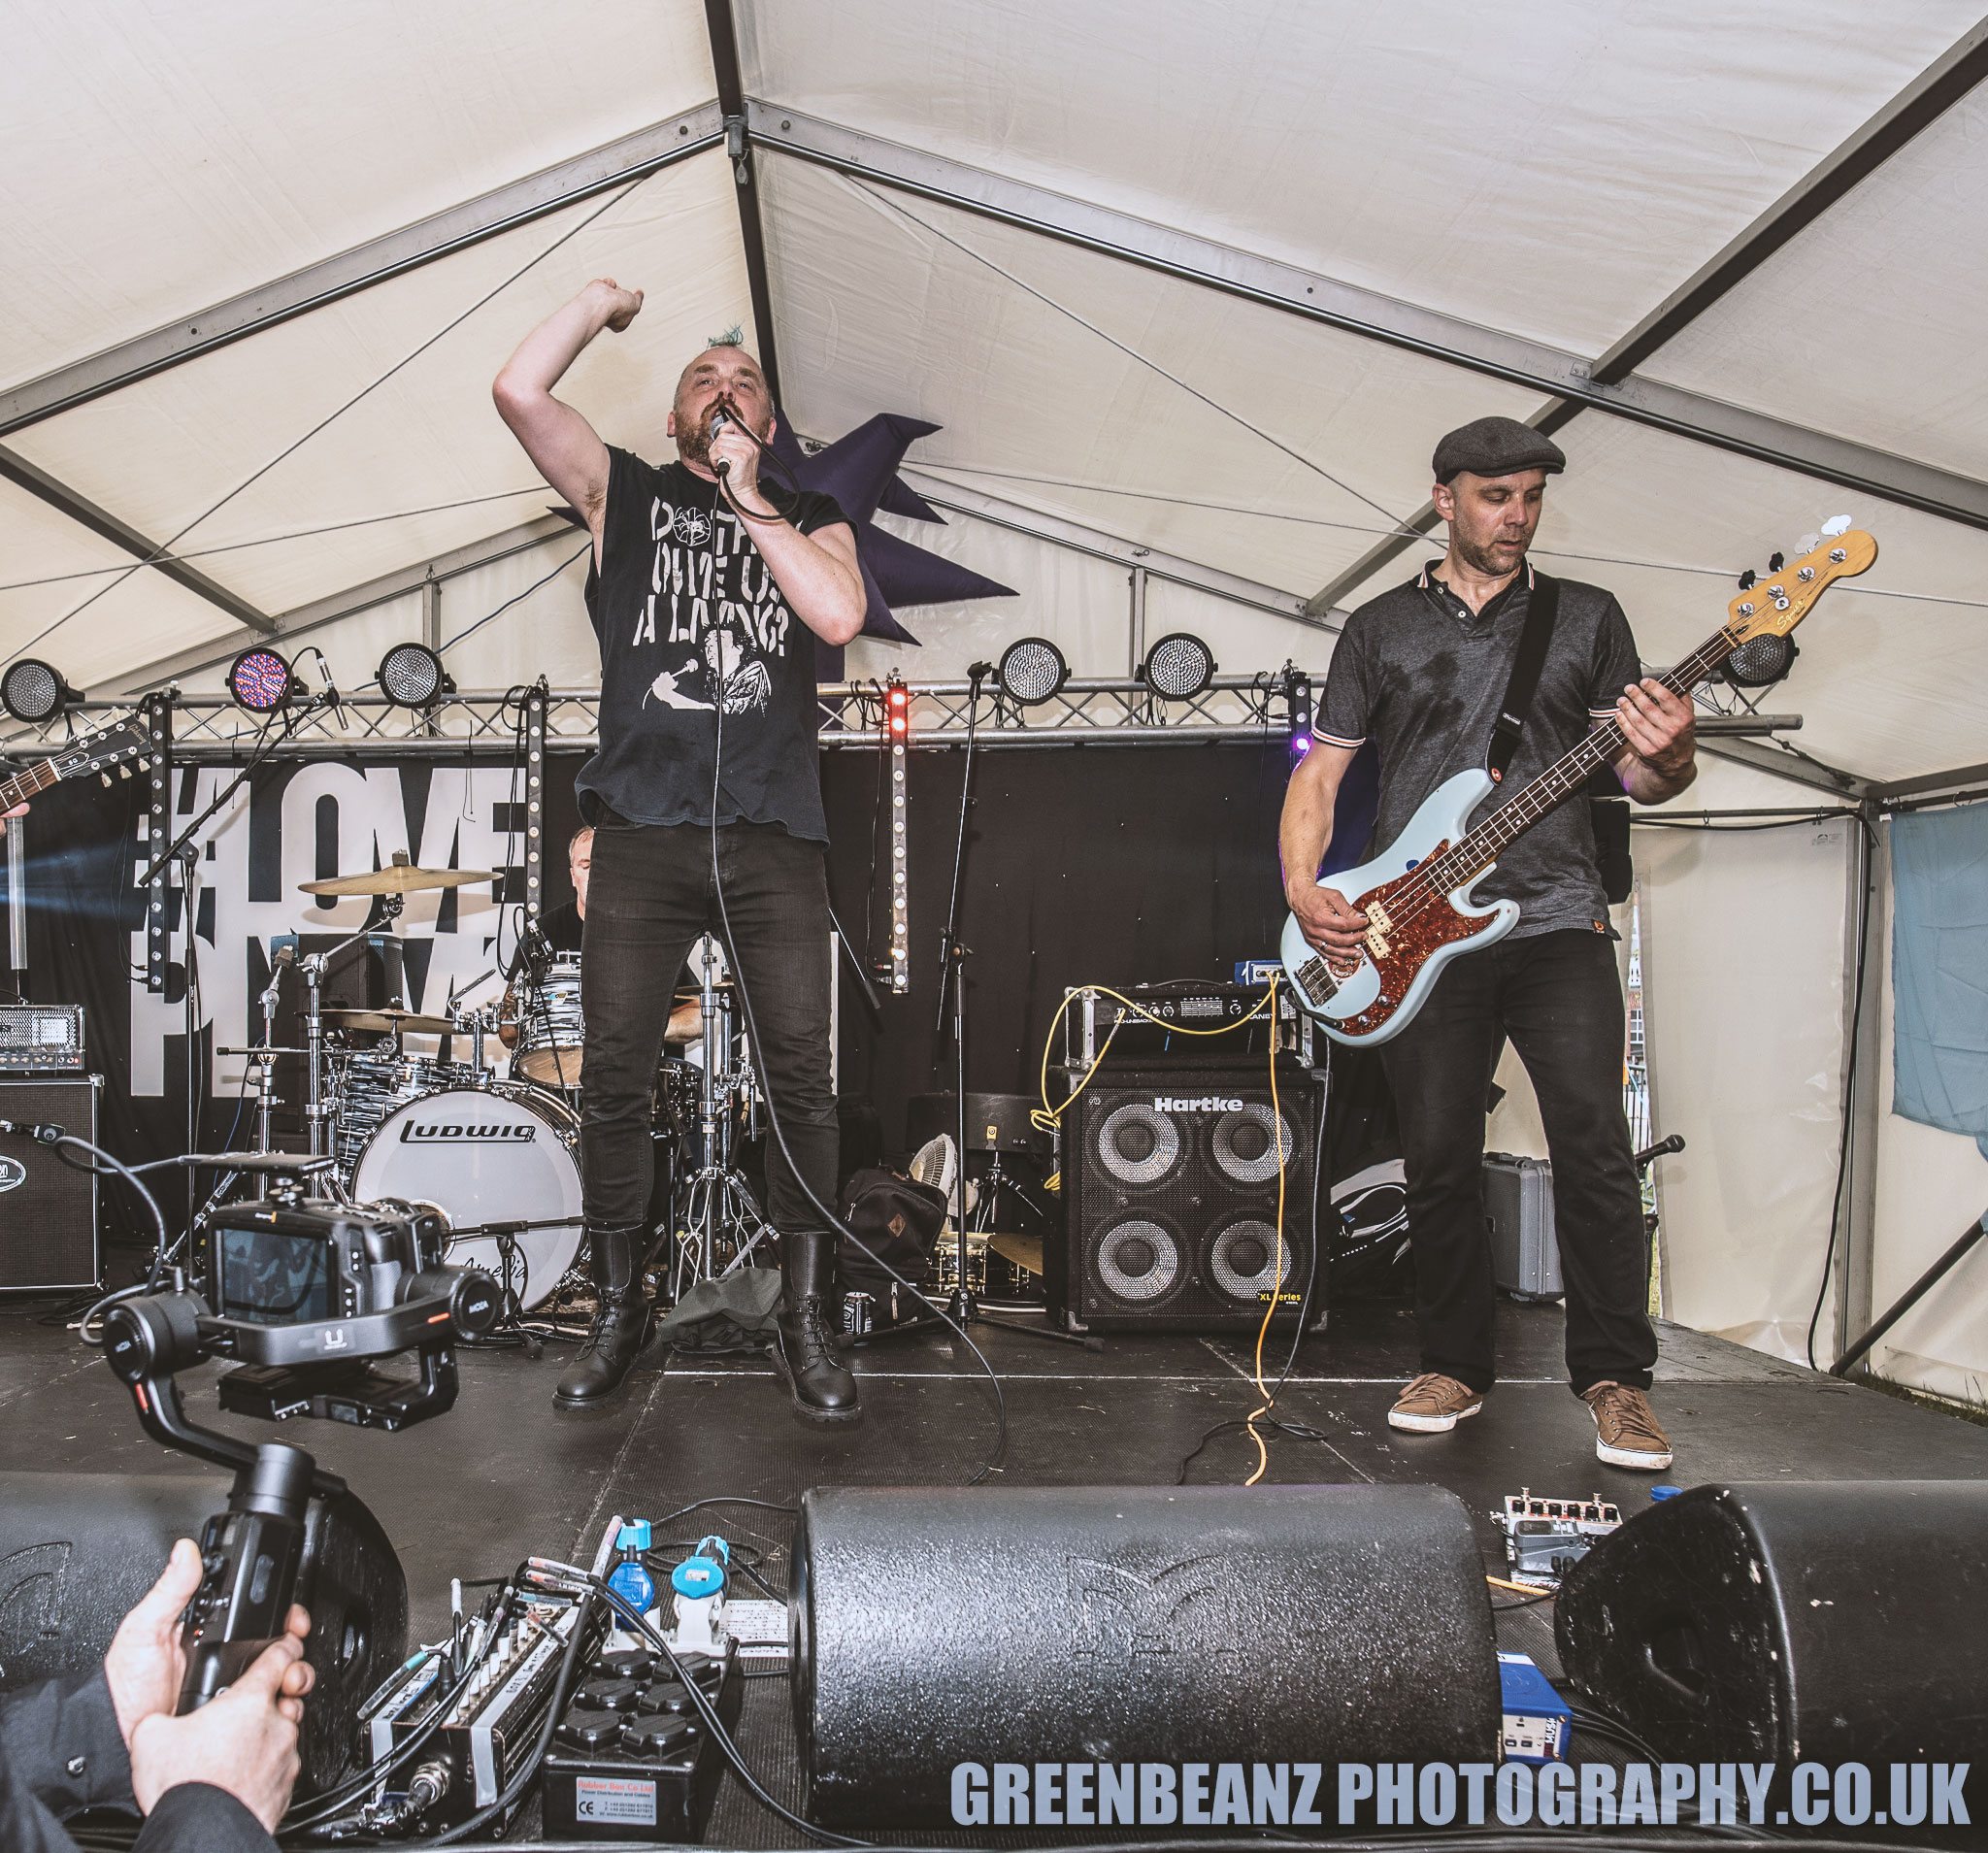 The Bus Station Loonies at Plymouth's Freedom Festival in 2019